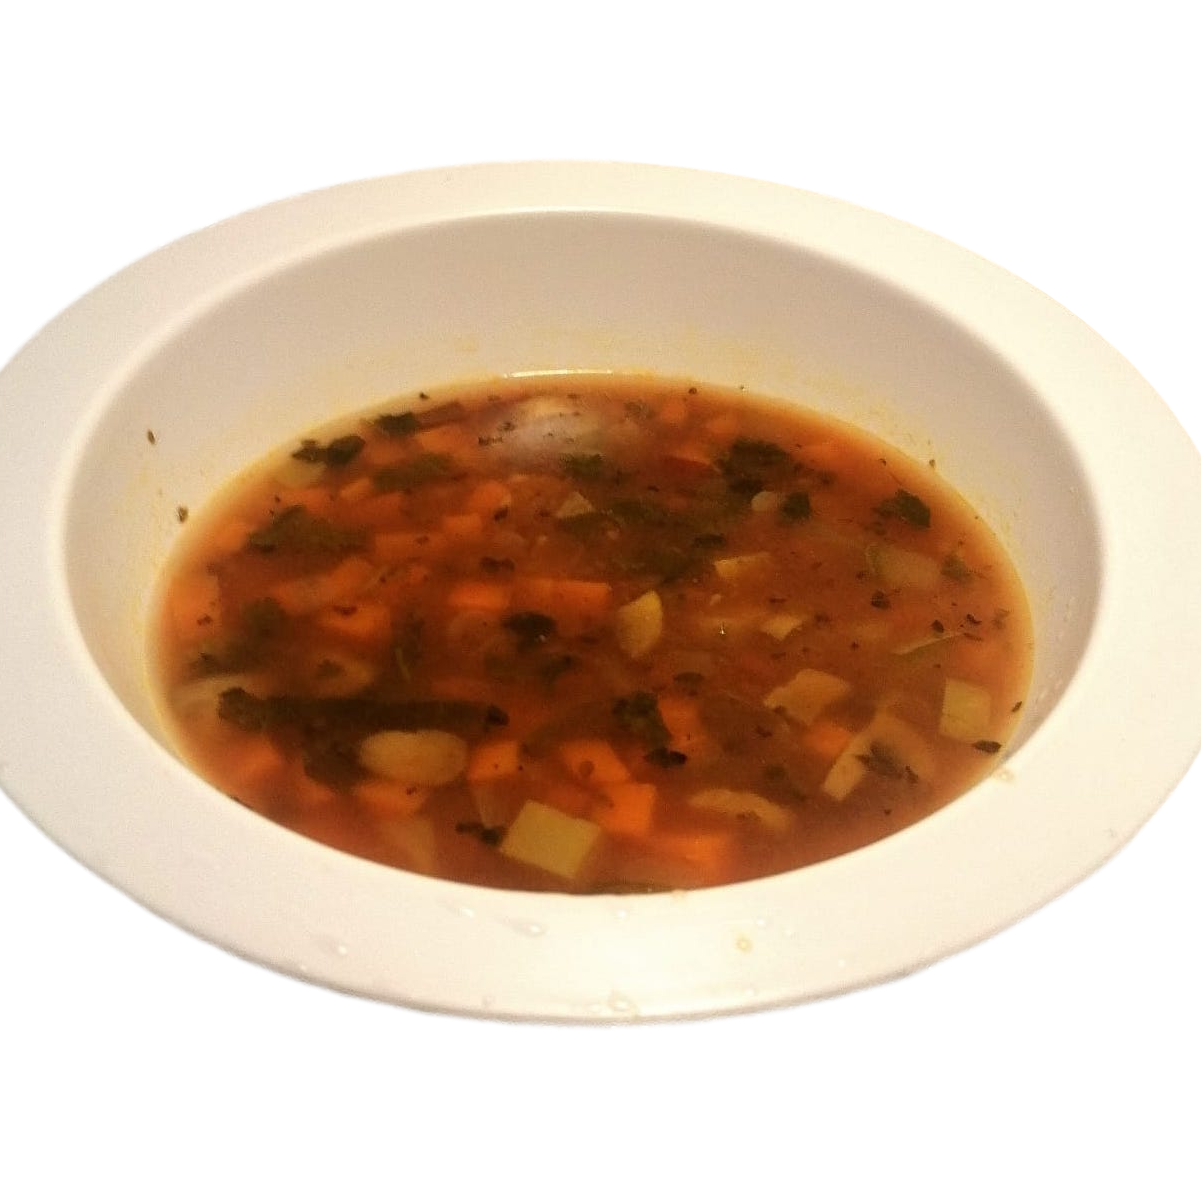 A classic Italian soup with a hearty, healthy, mix of veg with tomatoes, carrots, celery, garbanzos & veggie stock with basil, oregano & thyme.